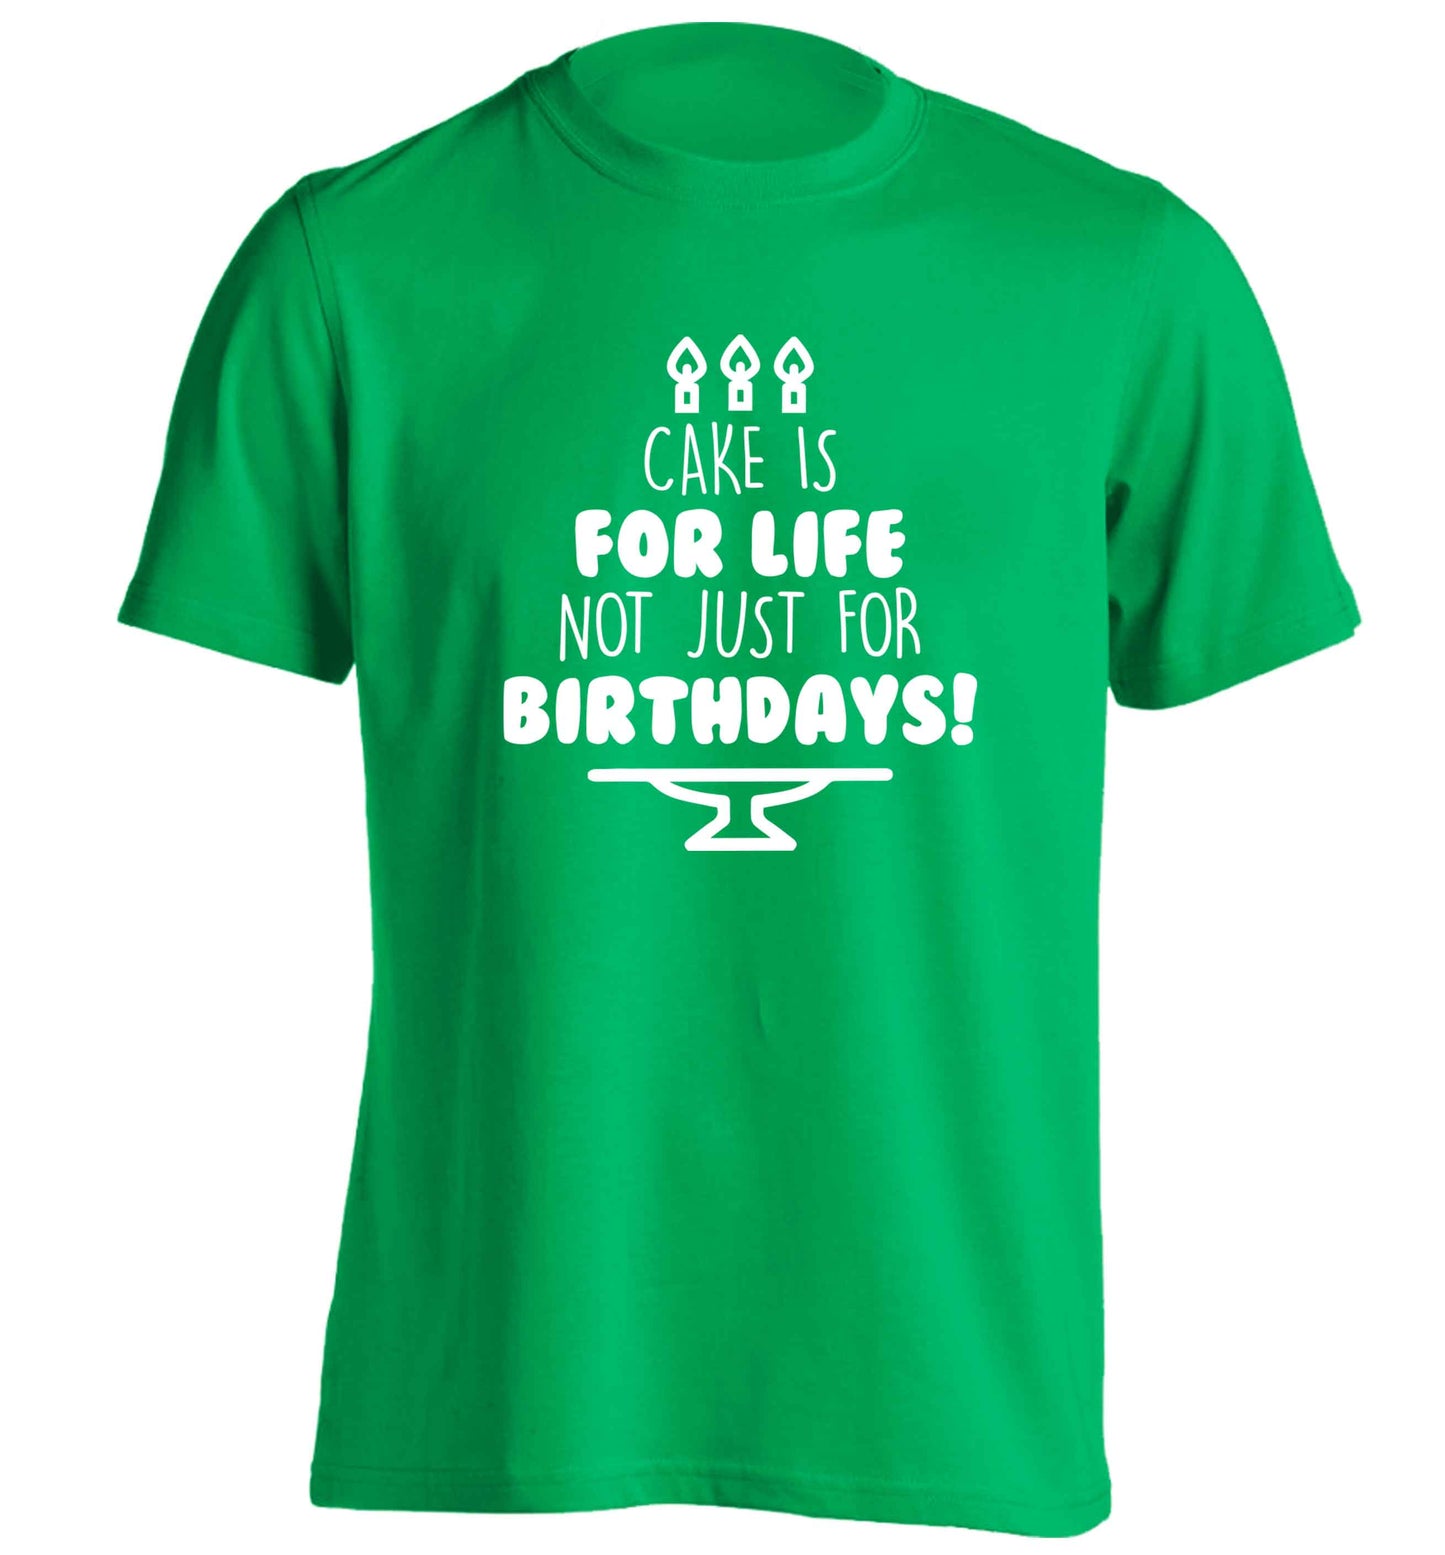 Cake is for life not just for birthdays adults unisex green Tshirt 2XL